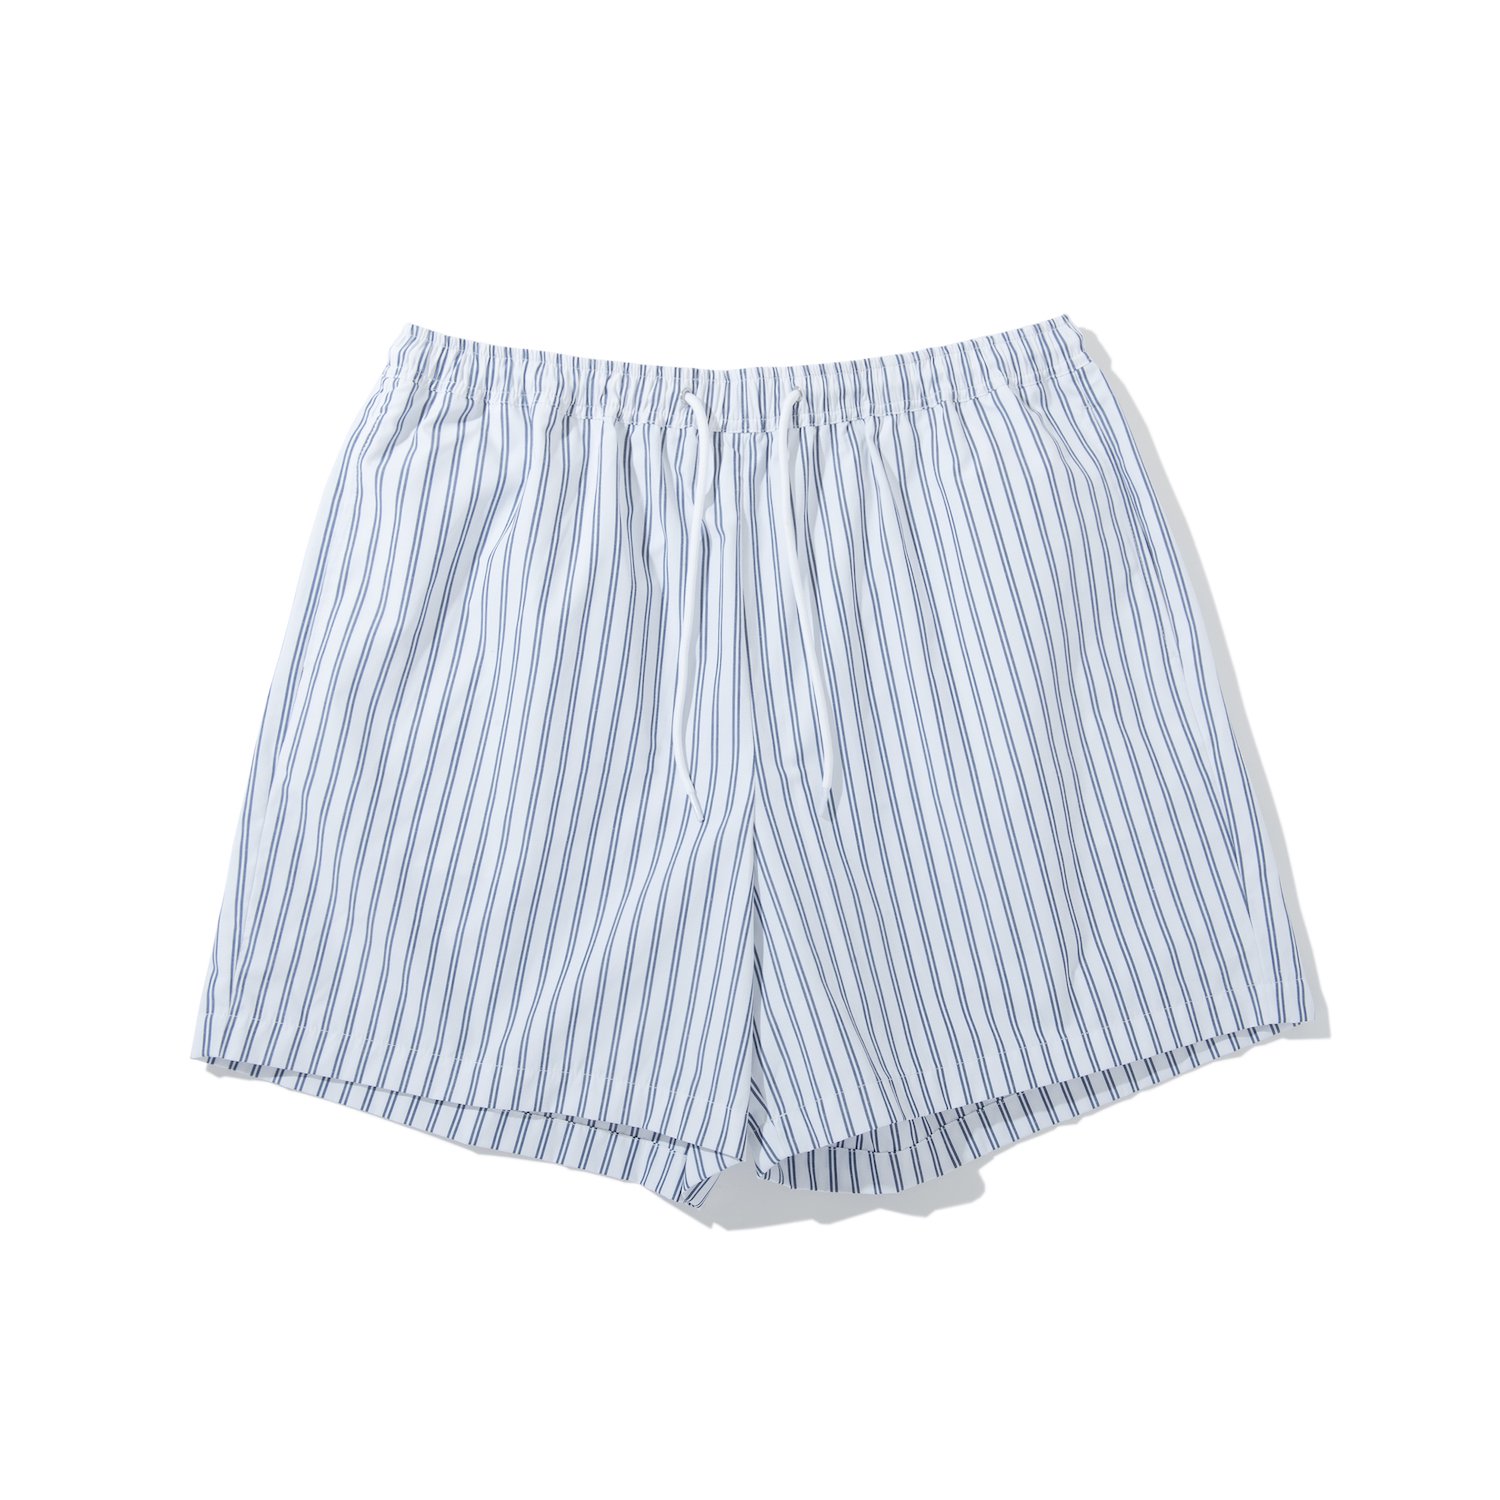 Acy<br>ROOM SHORTS<br>